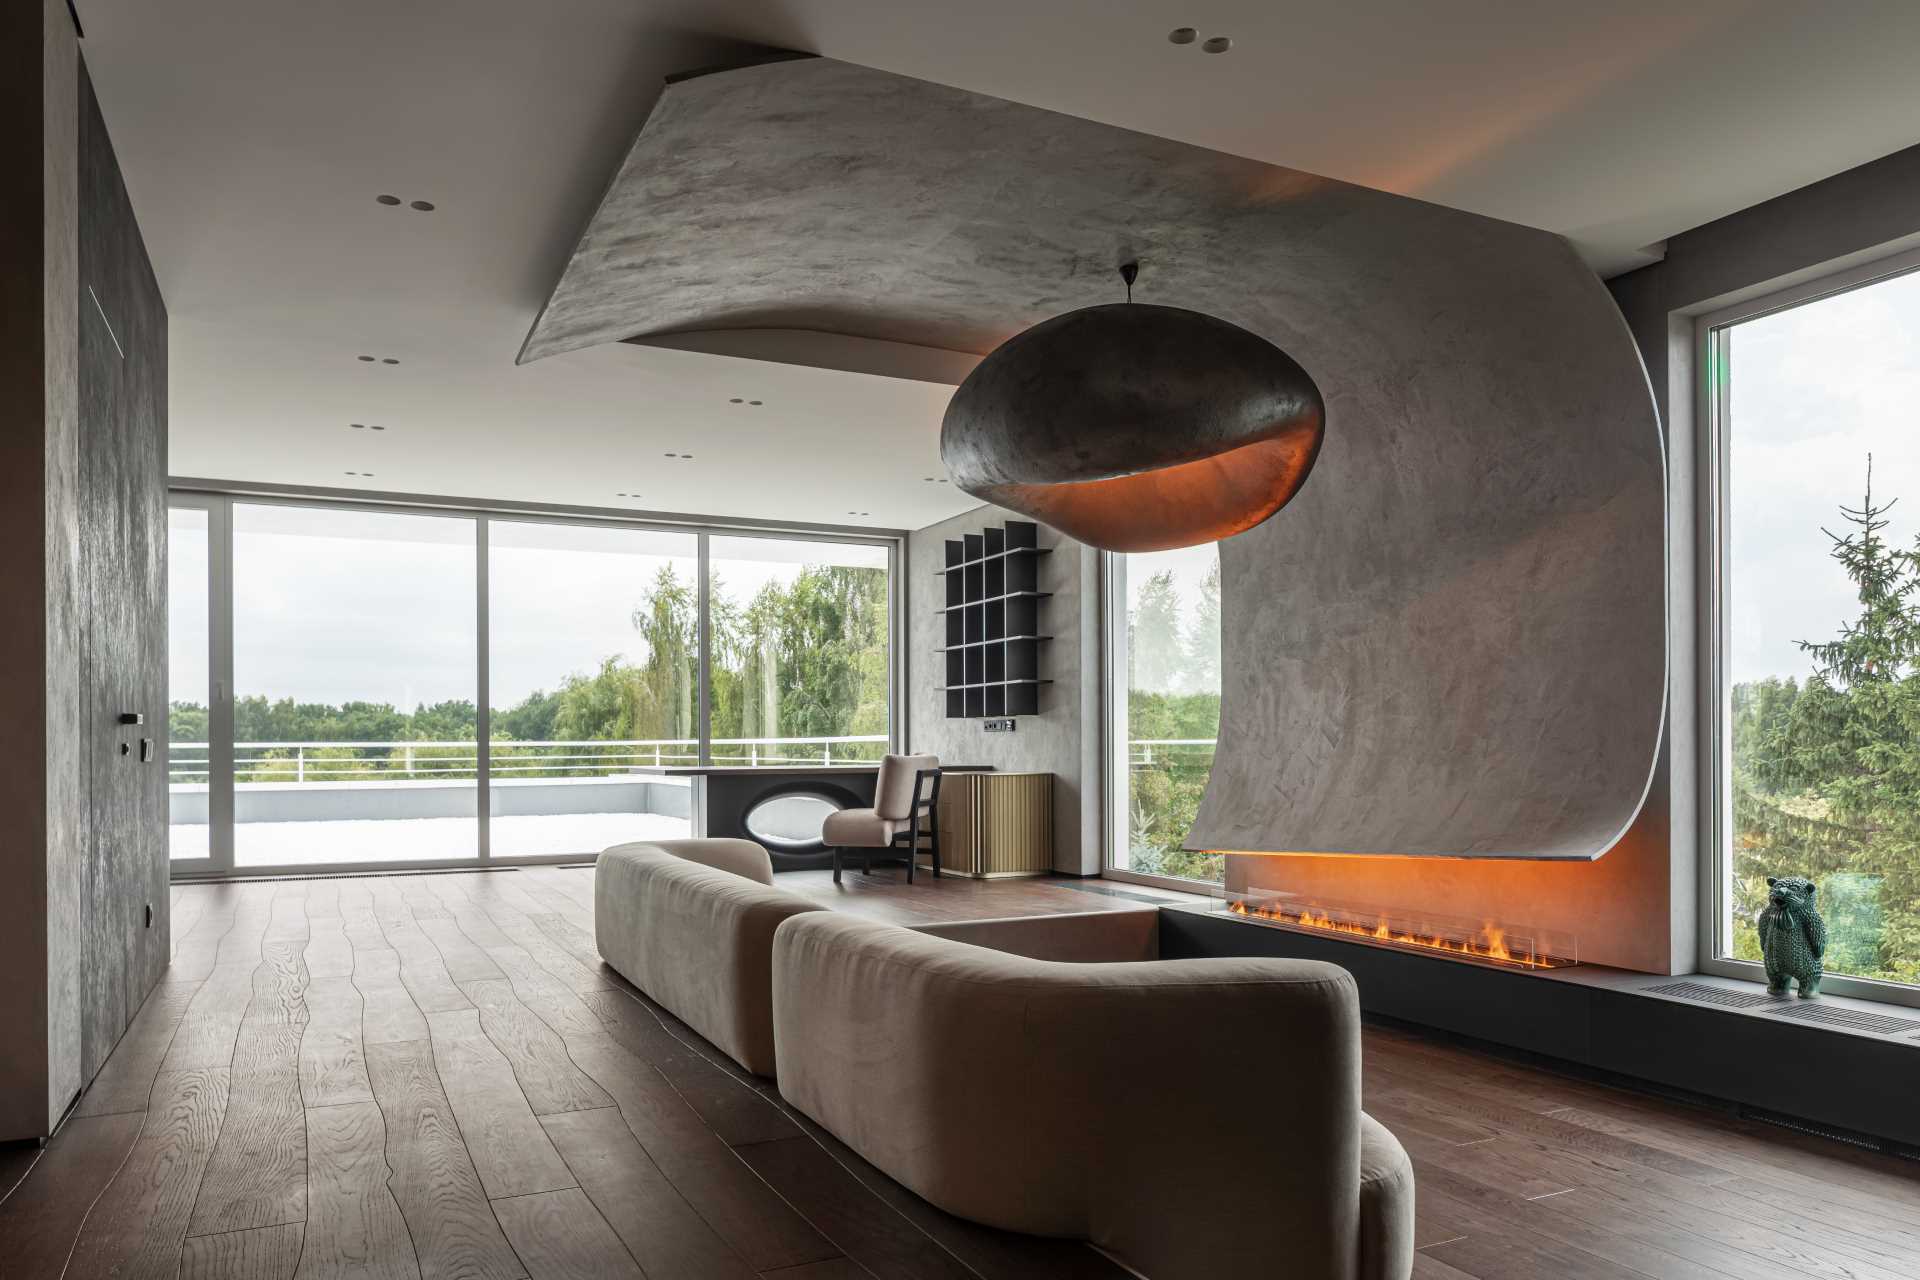 This modern living room has a sunken couch that neatly fits into the step-down, and faces the fireplace, while the focal point of the room is a curved section that's made of stone plaster. The curved accent wraps around the wall from above the fireplace to above the couch.